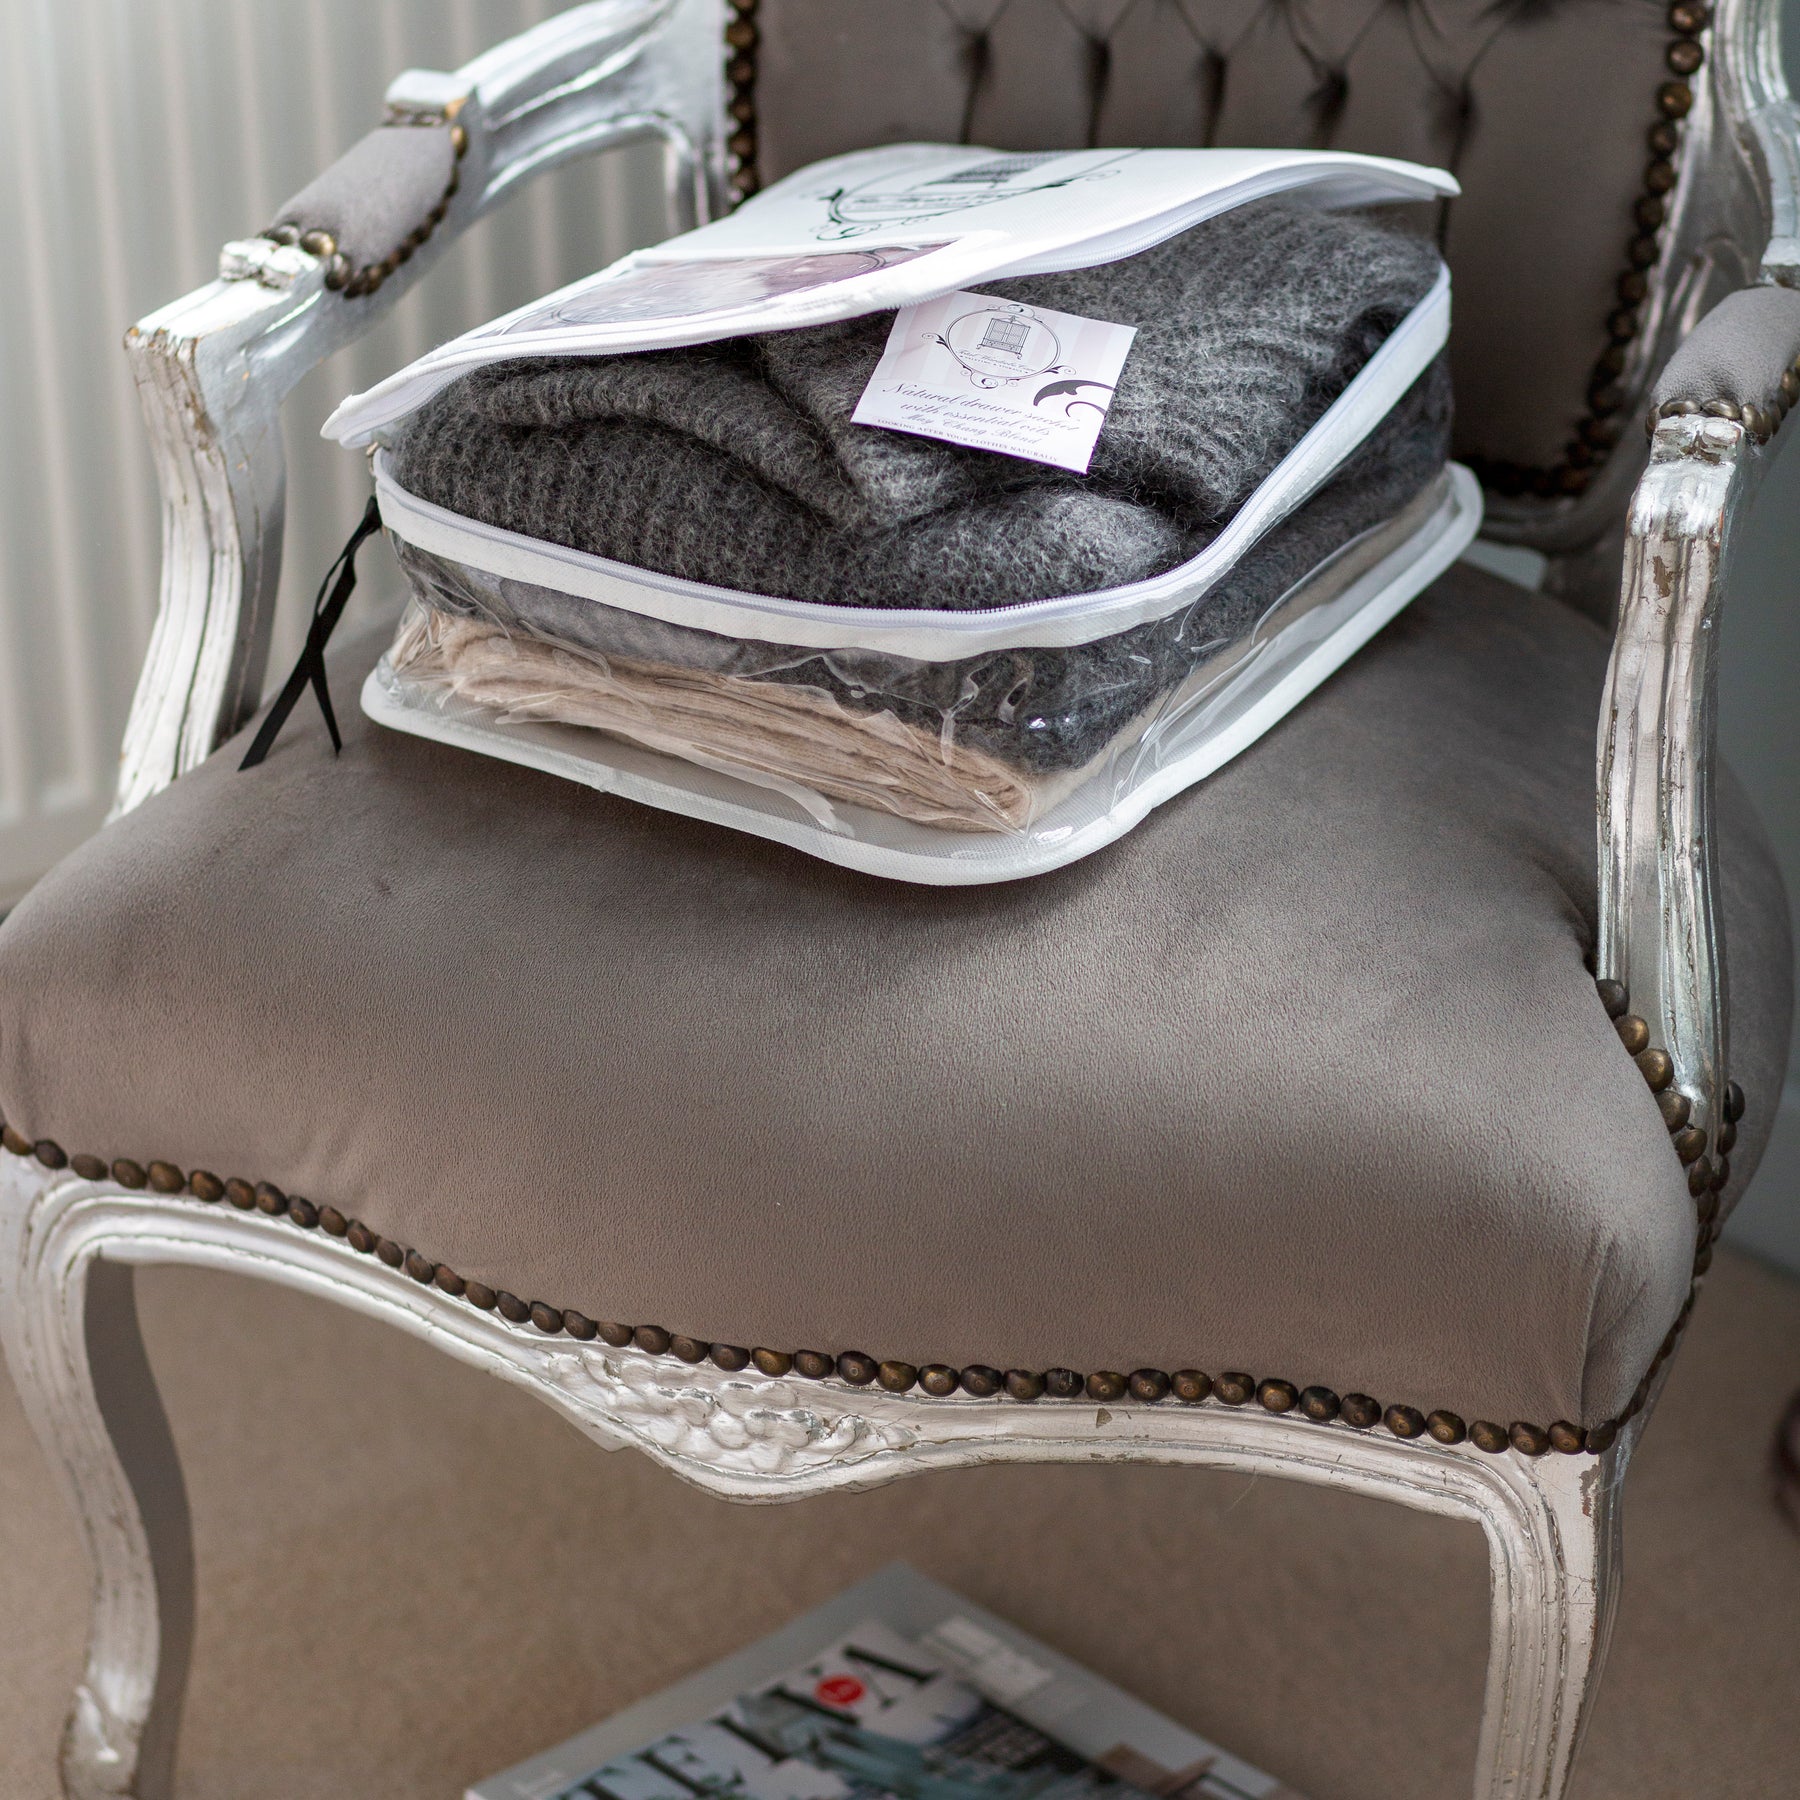 Unzipped Knitwear Storage Bag With Grey Wool Jumper inside and a drawer sachet sitting on top on jumper. The knitwear bag is placed on a elegant chair | Total Wardrobe Care